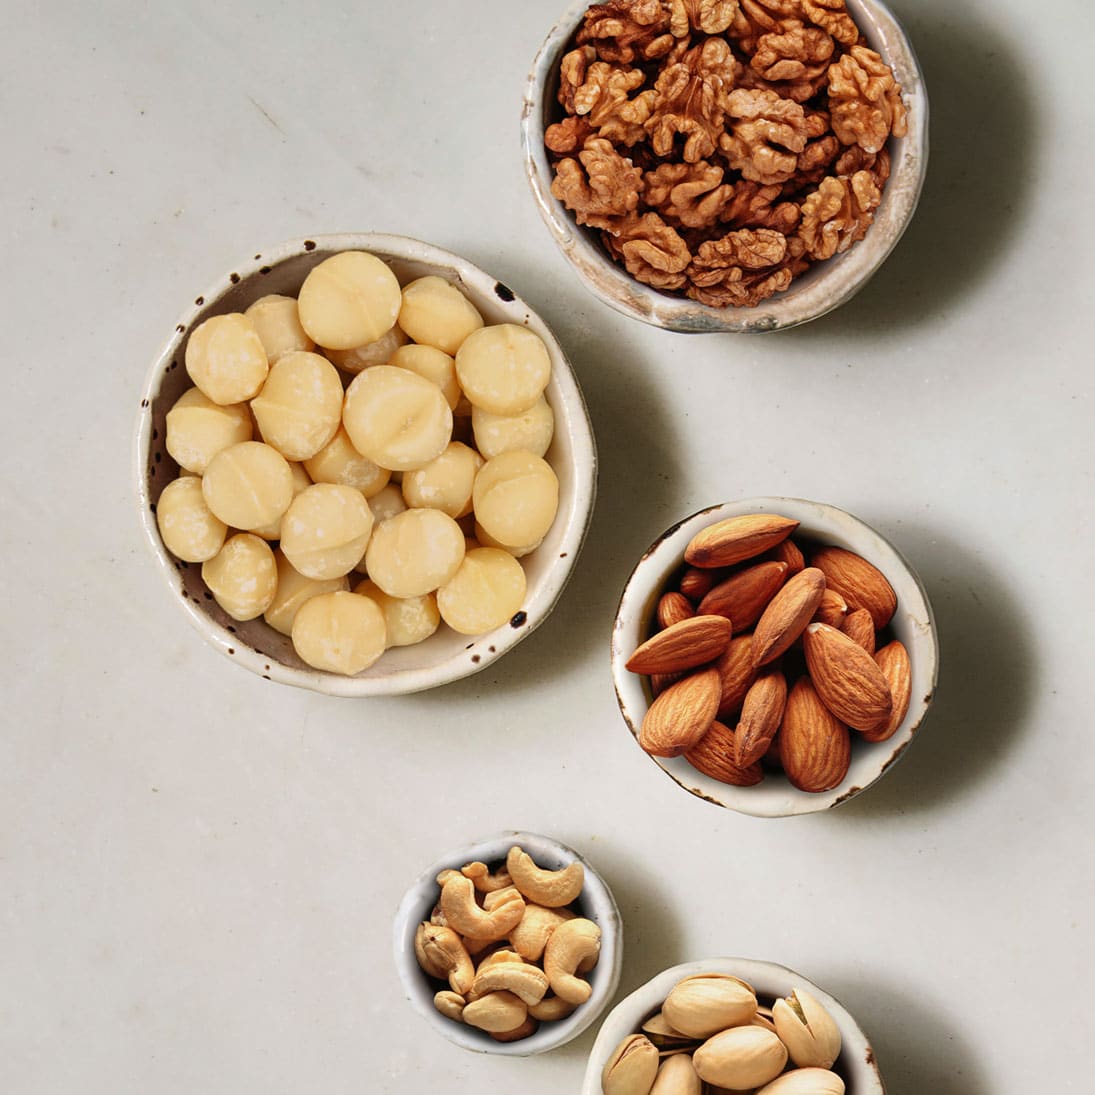 A nut comparison: nutrition and ‘good fats’